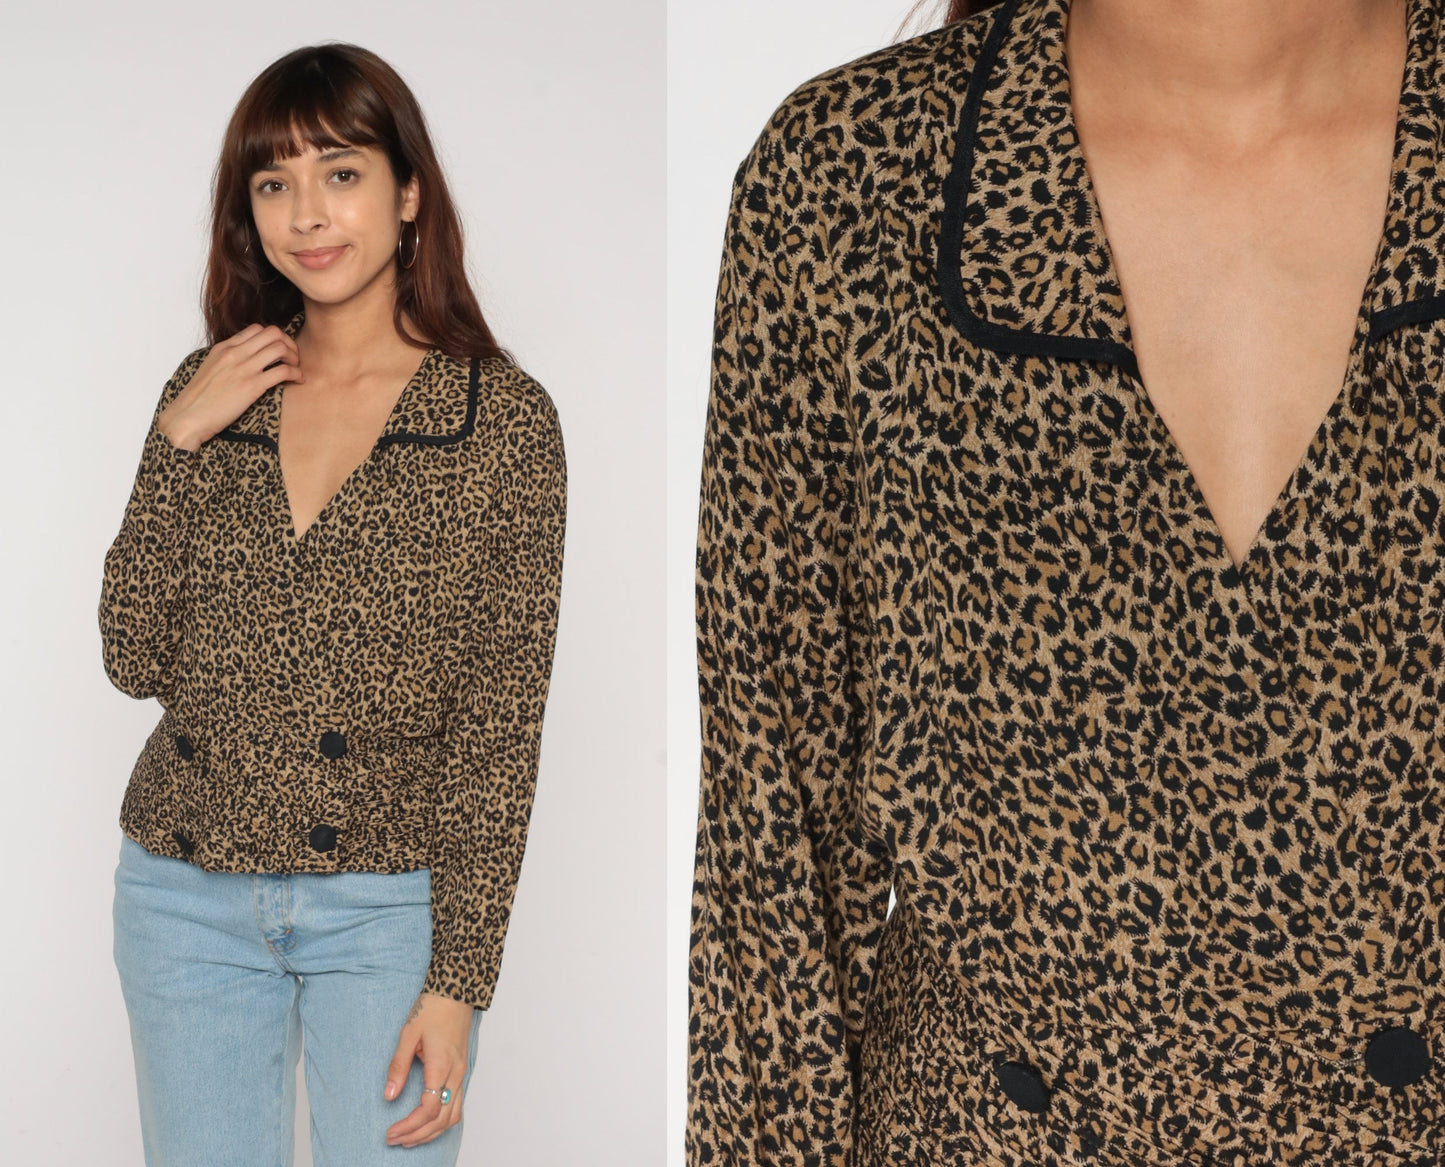 Leopard Print Blouse 90s Animal Print Shirt Double Breasted Button up Long Sleeve Top Collared V Neck Party Cheetah Vintage 1990s Large L 12